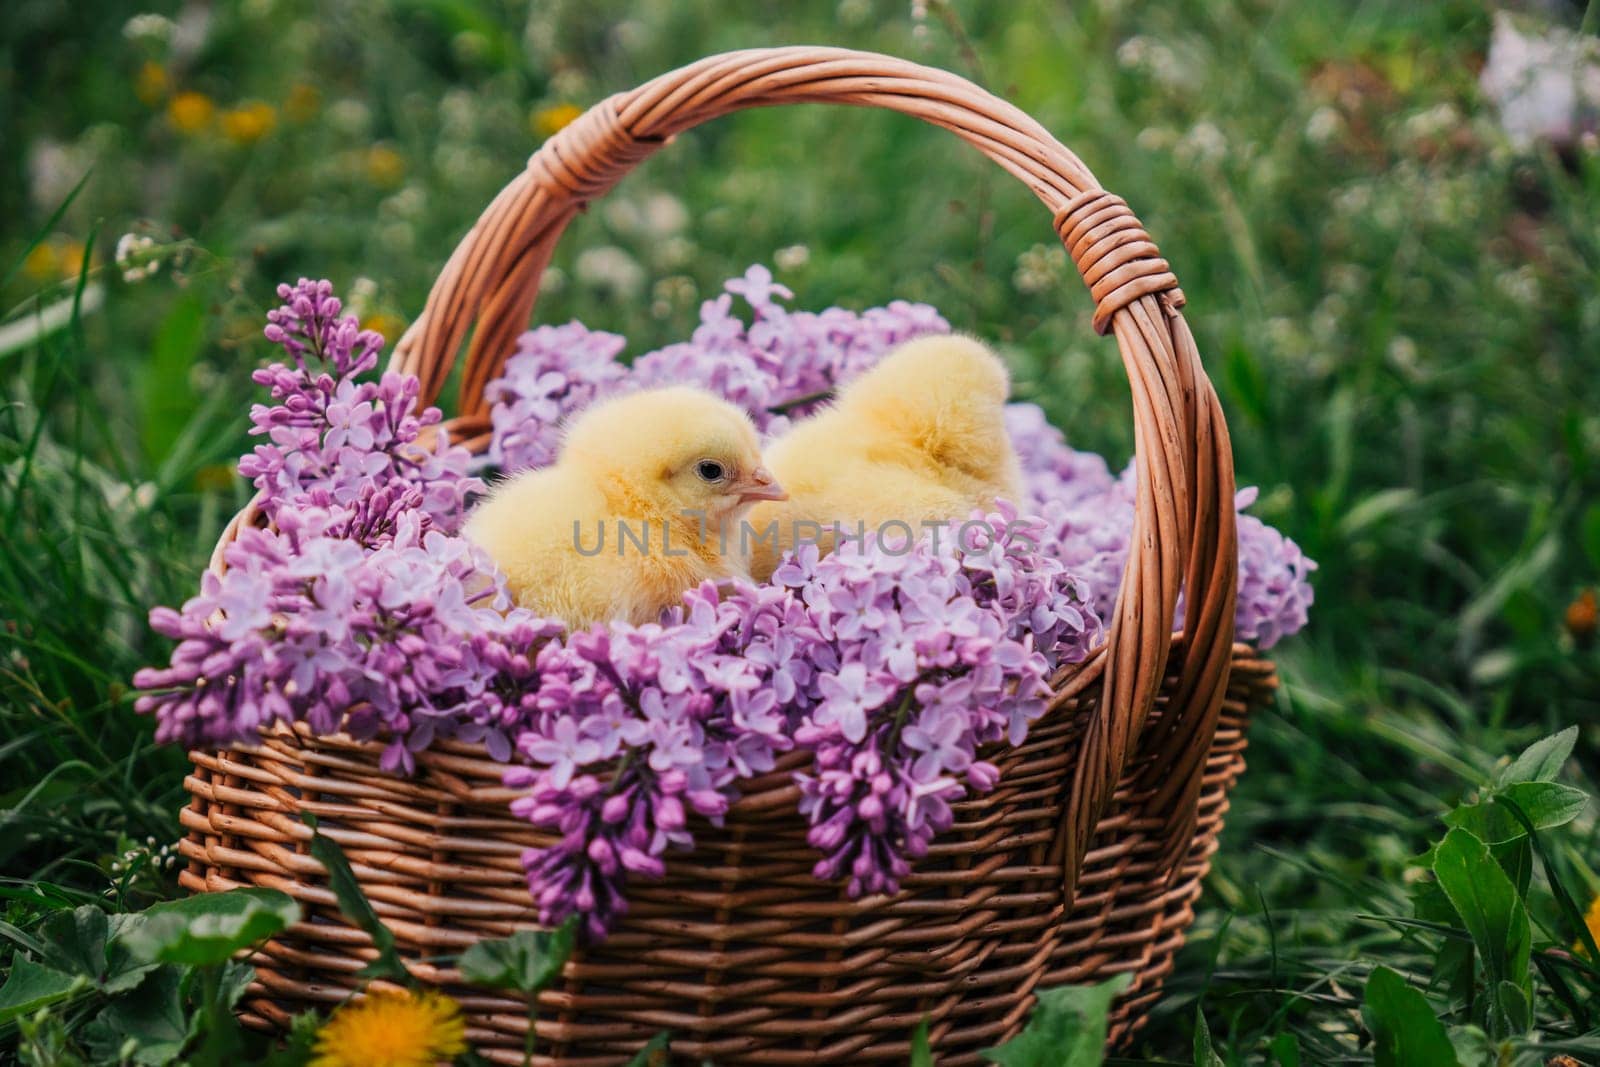 Cute little yellow chickens sitting in wicker basket with lilac flowers. Easter. by kristina_kokhanova